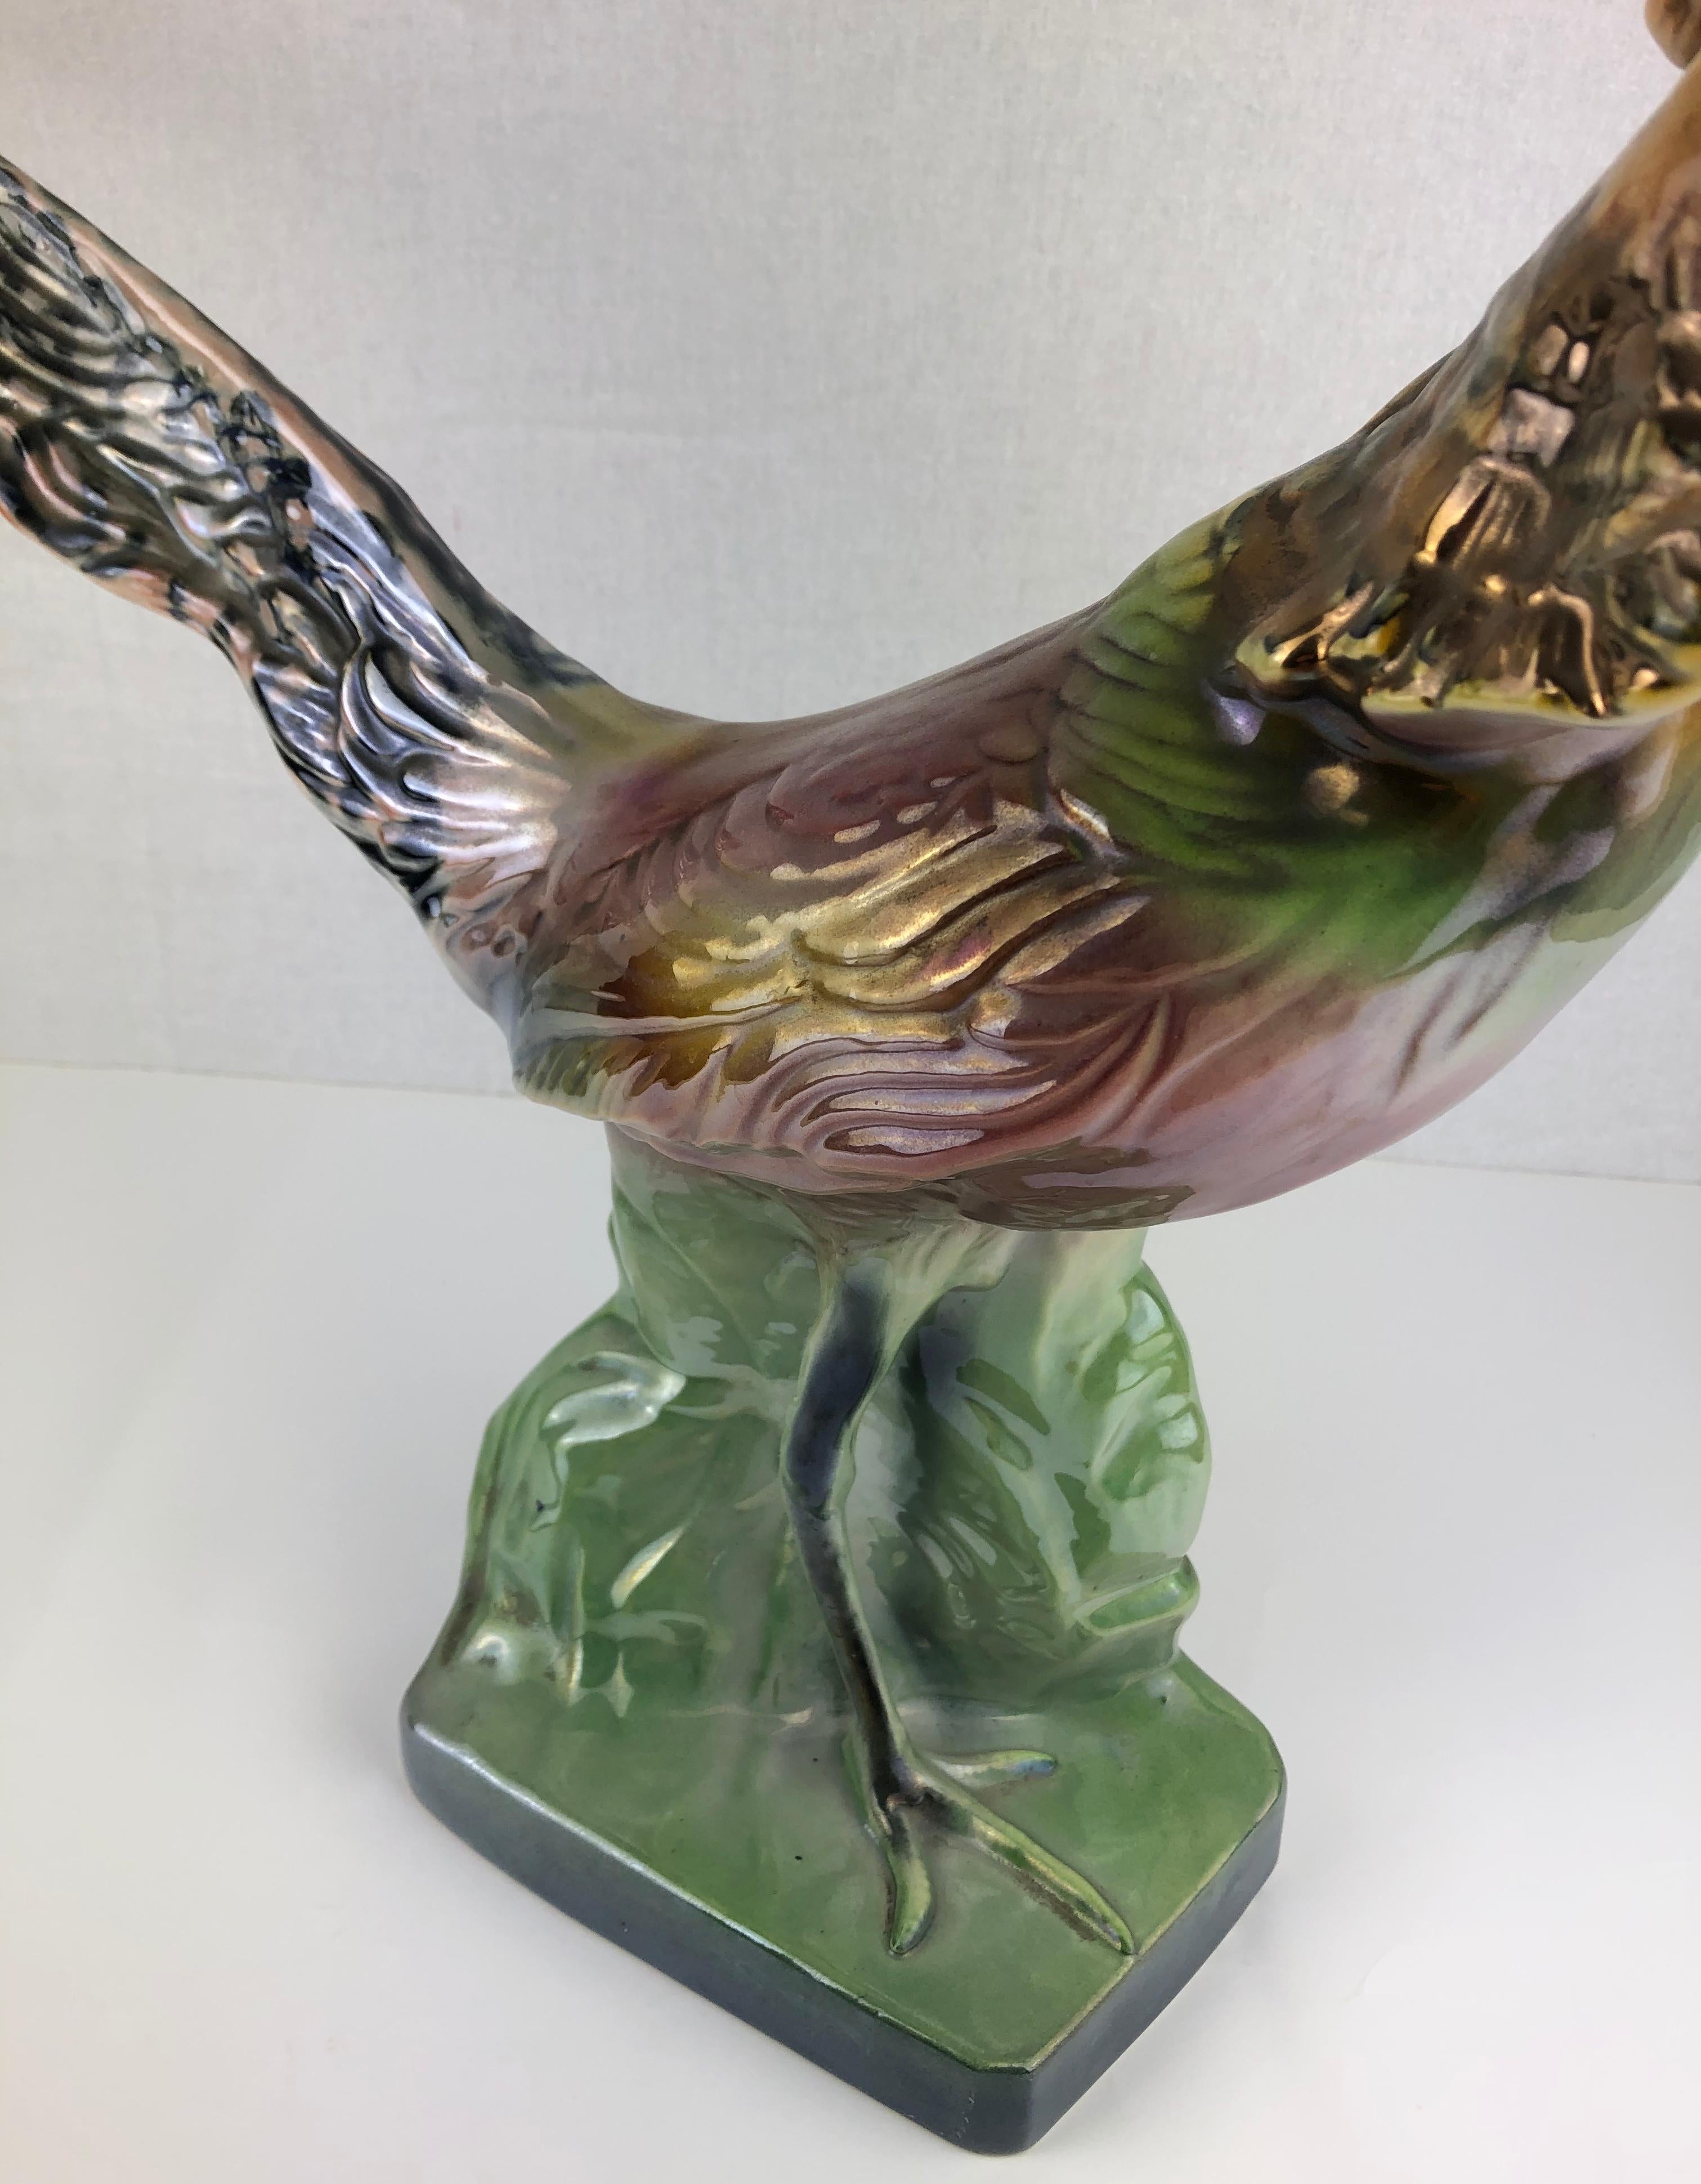 Glazed Early 20th Century Sculpted Ceramic Pheasant Bird Figure from H. Bequet